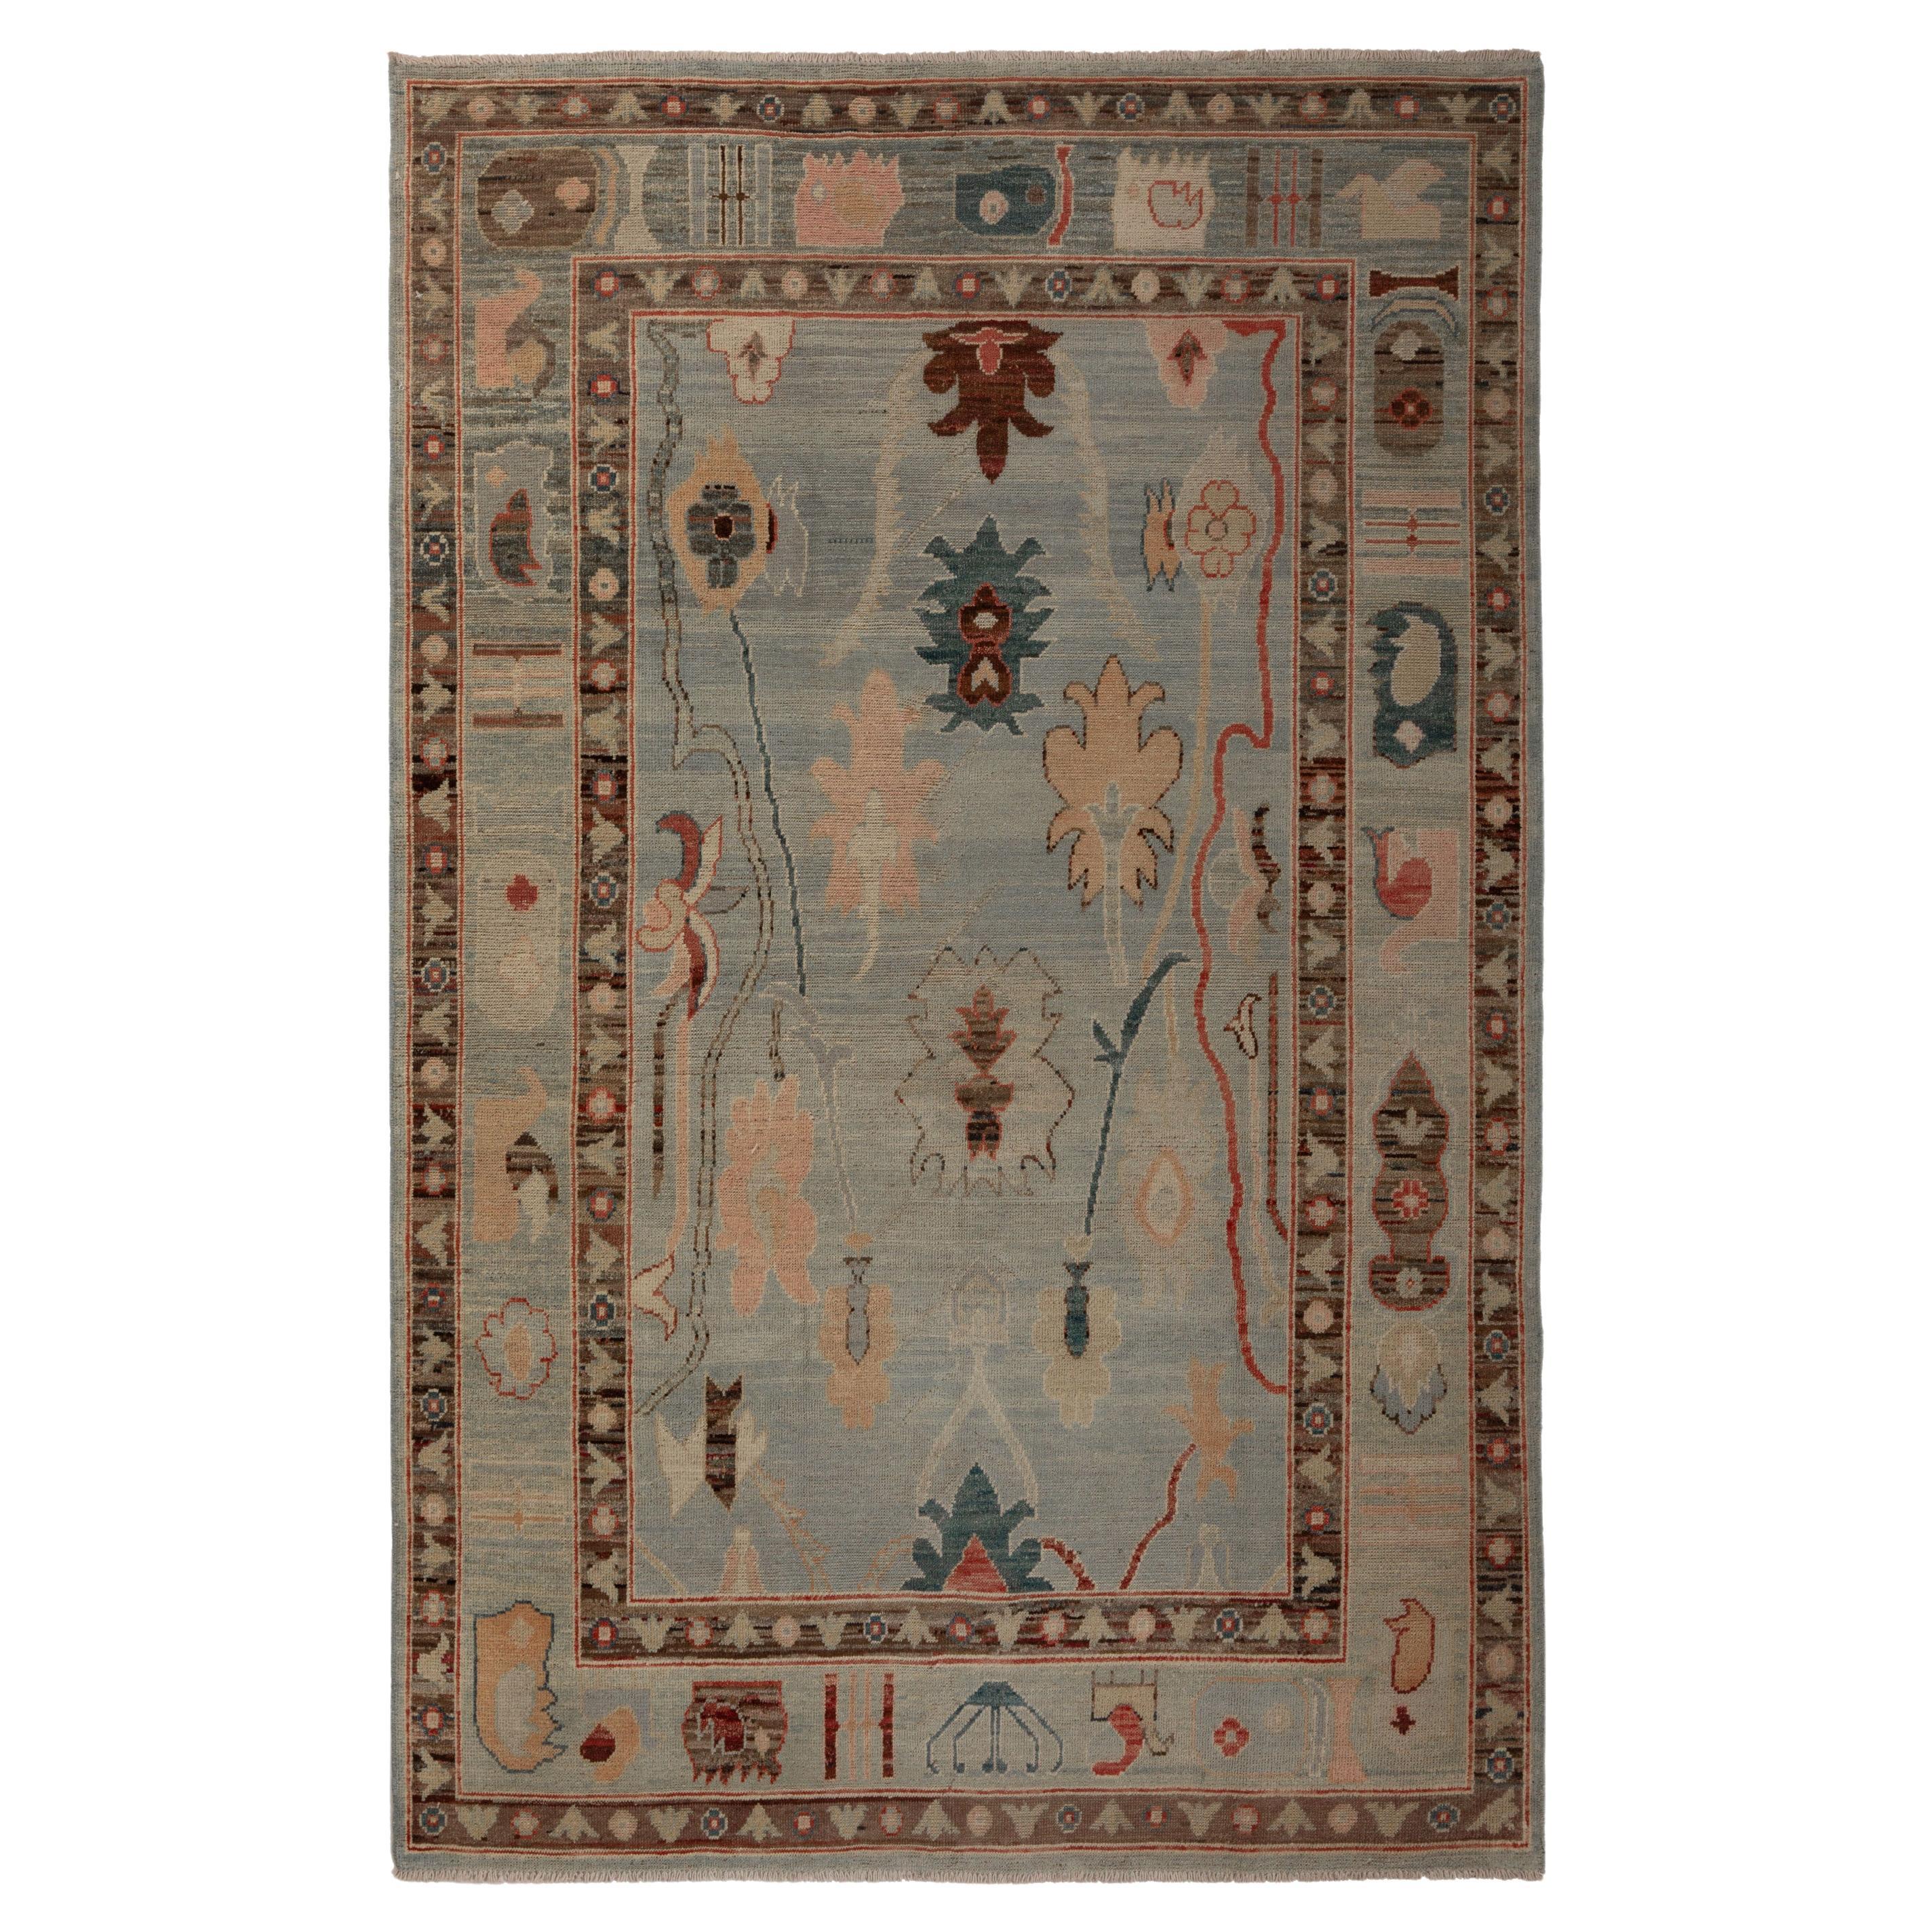 abc carpet Zameen Multicolored Traditional Wool Rug - 5'4" x 7'10" For Sale